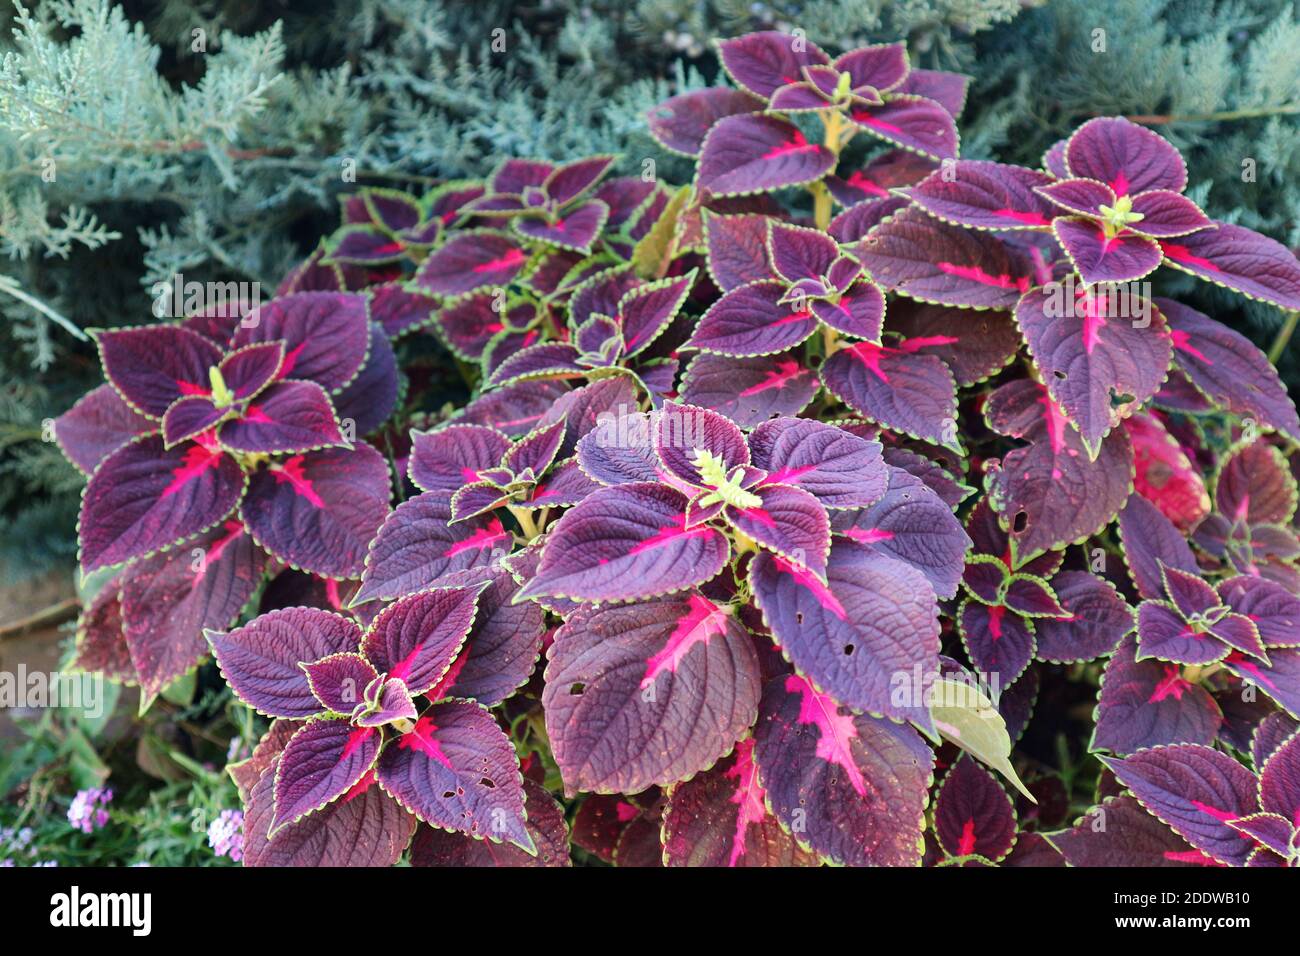 Common coleus or Plectranthus scutellarioides plant. Purple leaves of the painted nettle in garden. Stock Photo